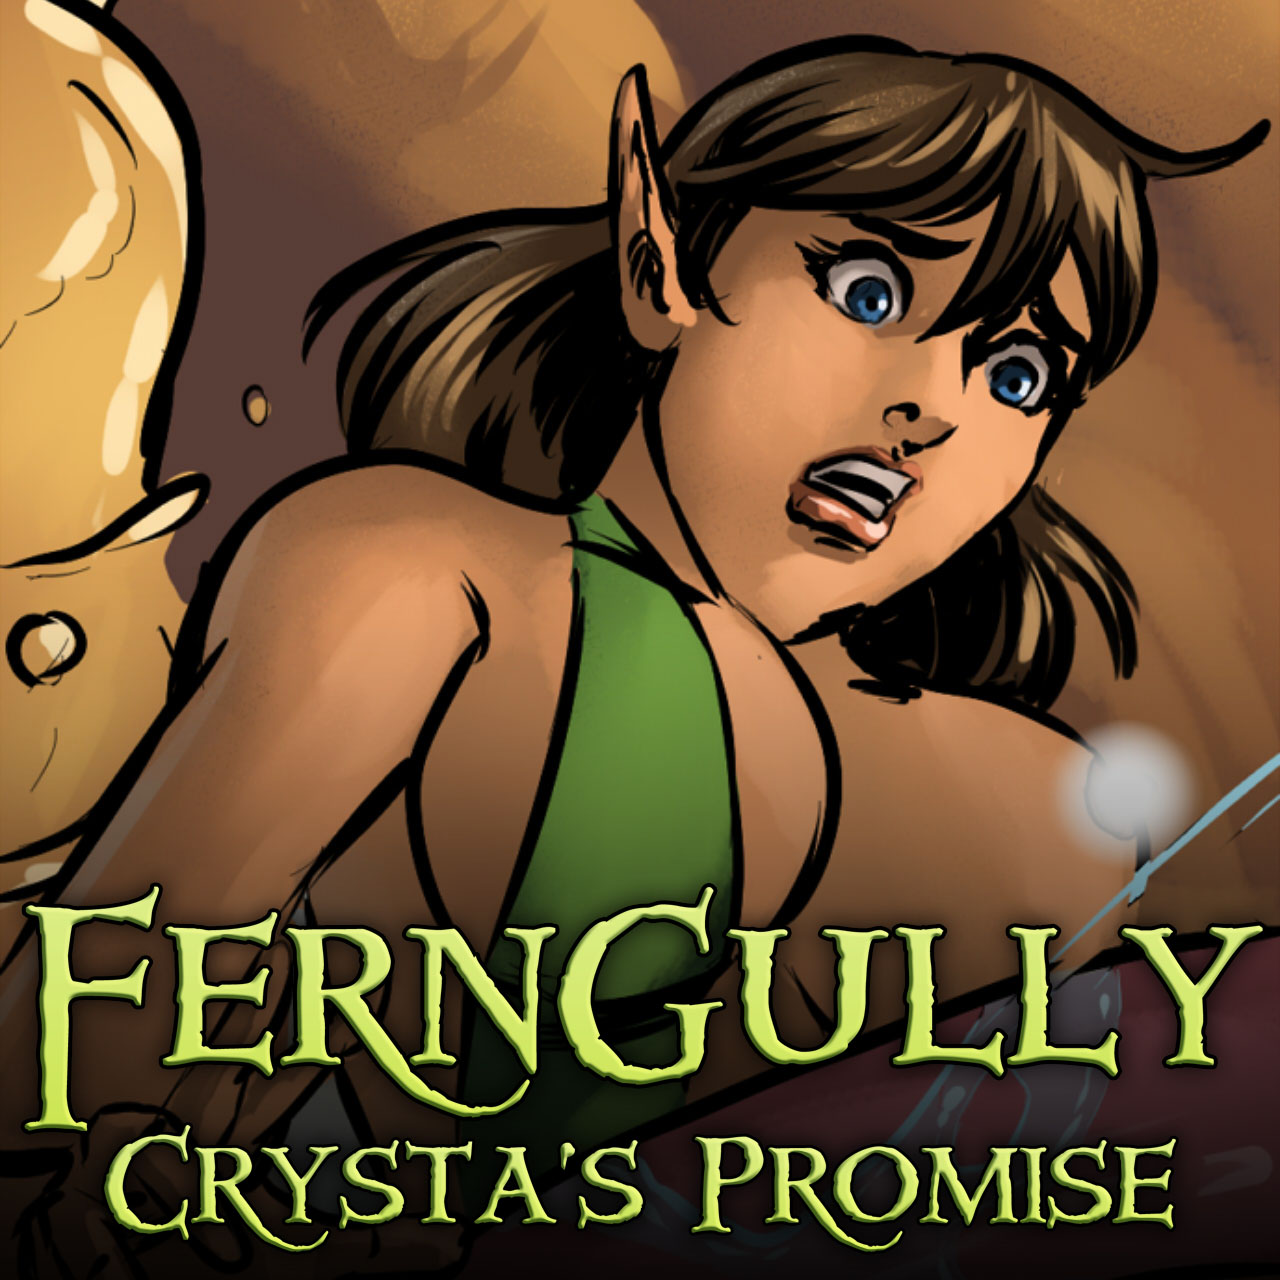 FernGully: Crysta's Promise